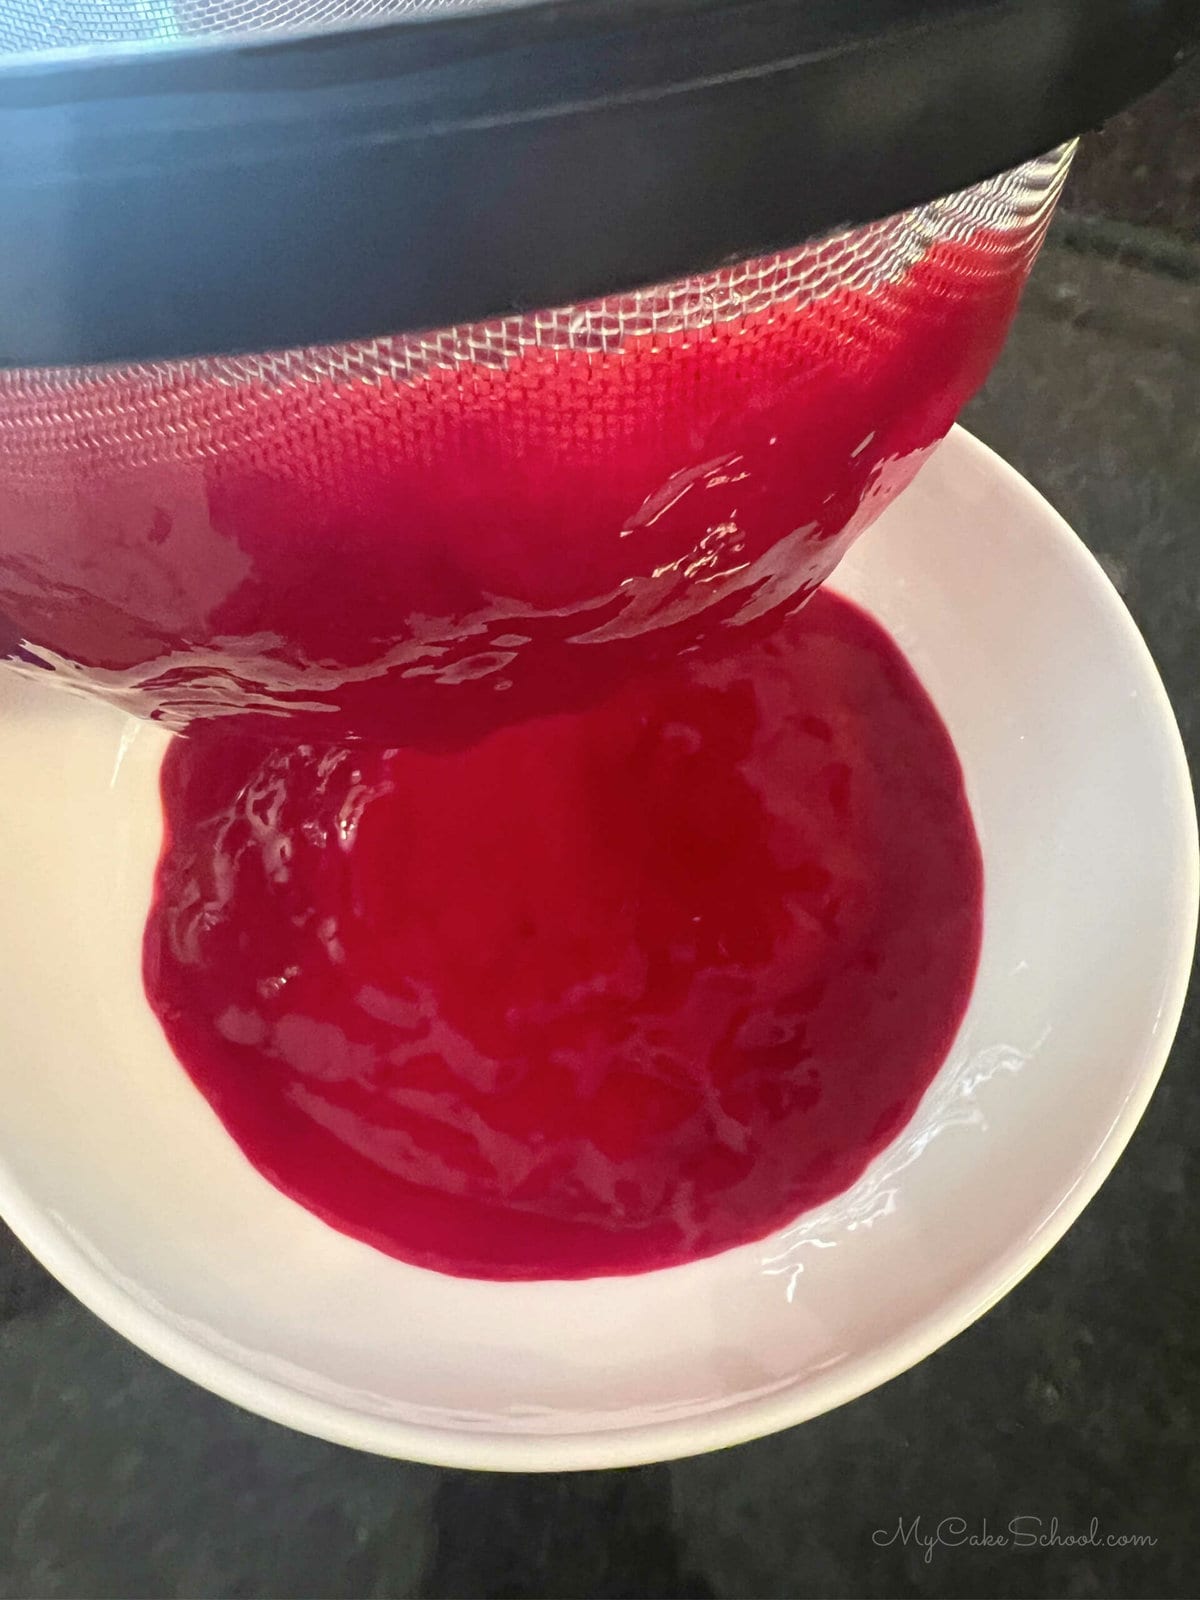 Straining raspberry puree through a fine strainer and into a white bowl, removing seeds.  